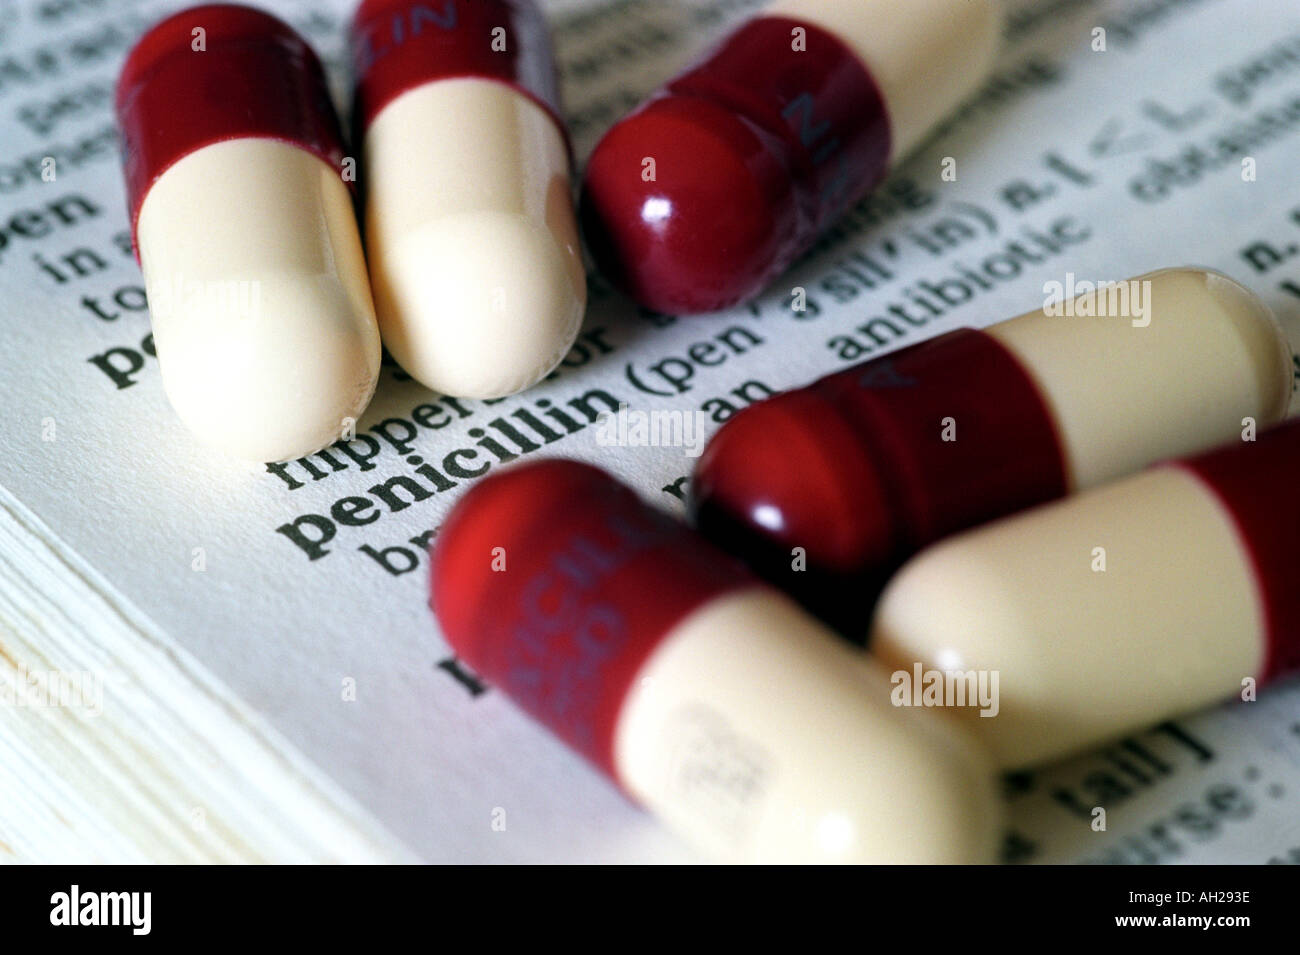 Penicillin capsules on the dictionary definition of the word Stock Photo